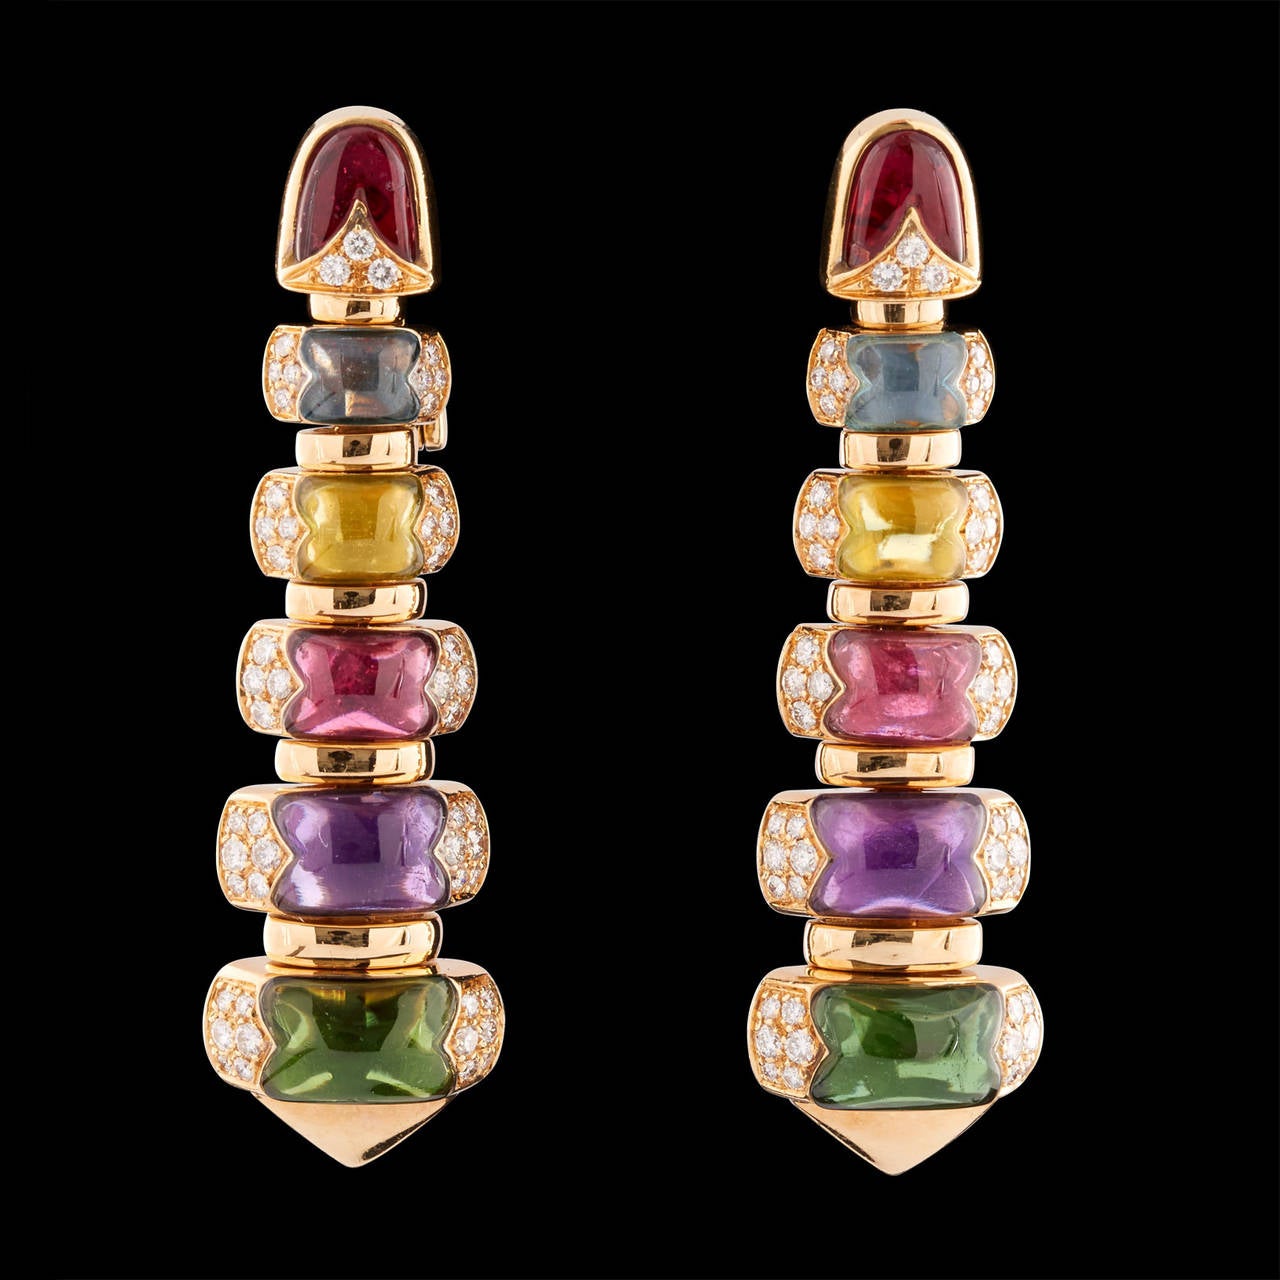 Pair of 18Kt Yellow Gold 'Celtica' Earrings by Bulgari Featuring Multi-Colored Gems & 108 Pave Diamonds totaling 1.52 carats. The colored gems featured are amethyst, peridot, varied colored tourmalines and topaz. The earrings measure approximately 2